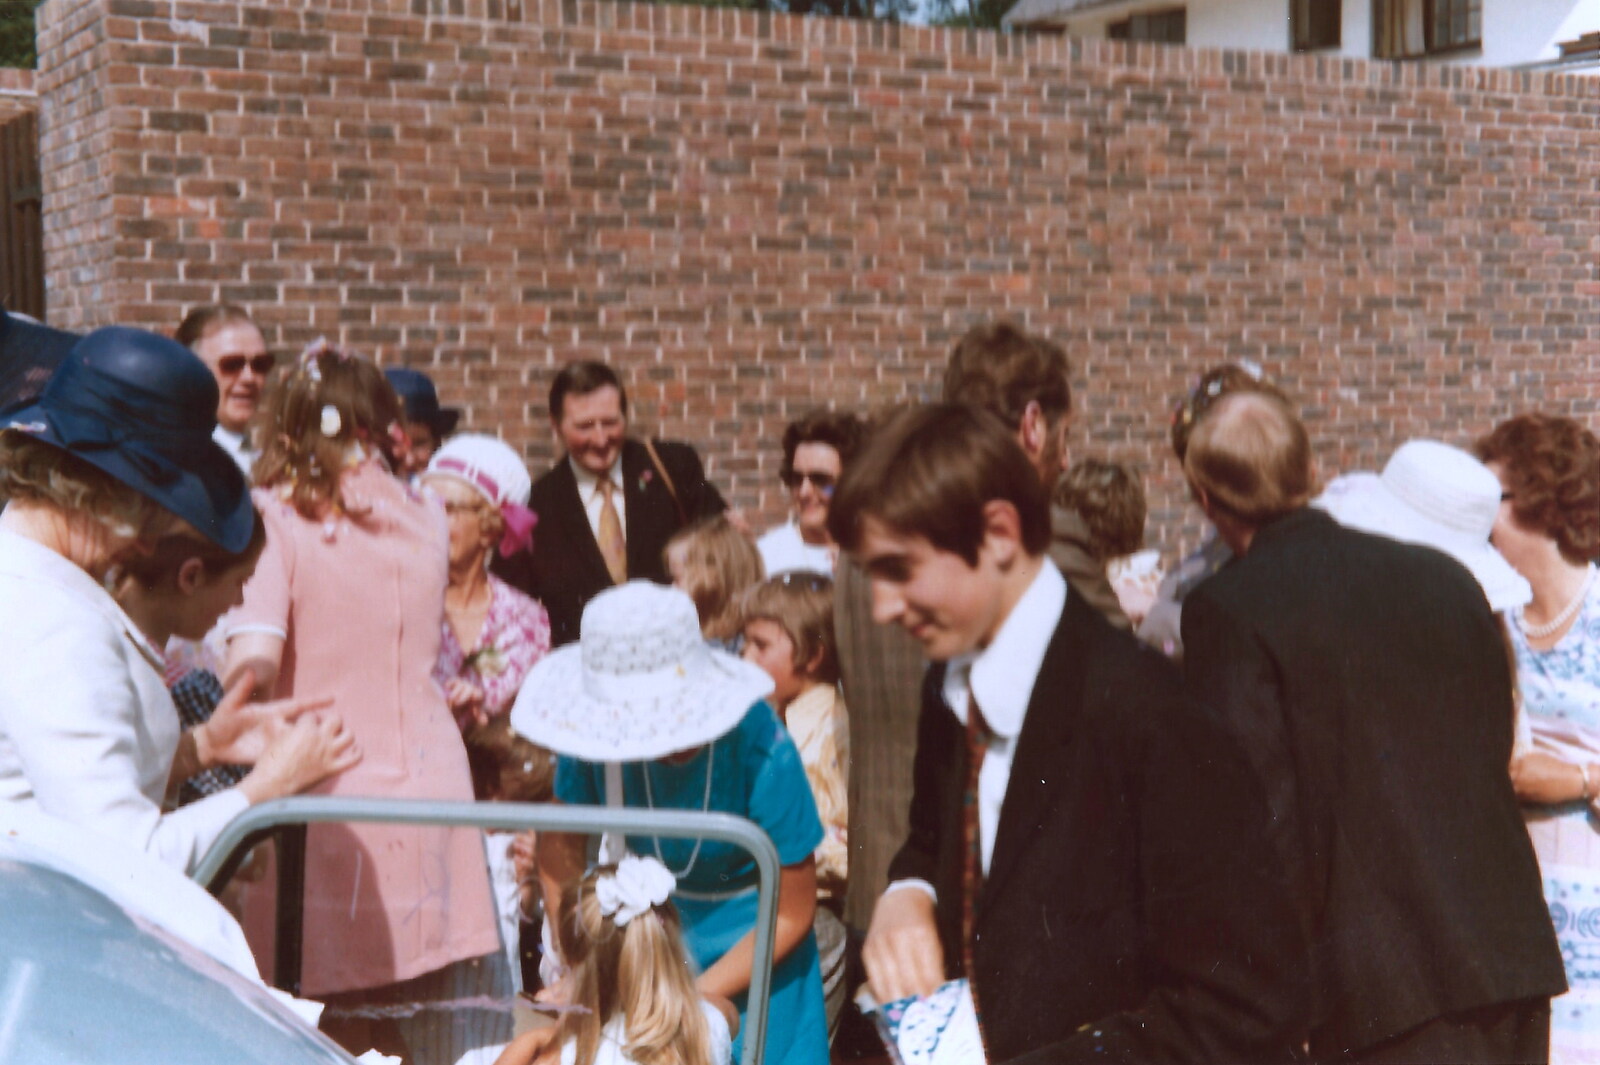 Family History: The 1960s - 24th January 2020: Milling around at a wedding